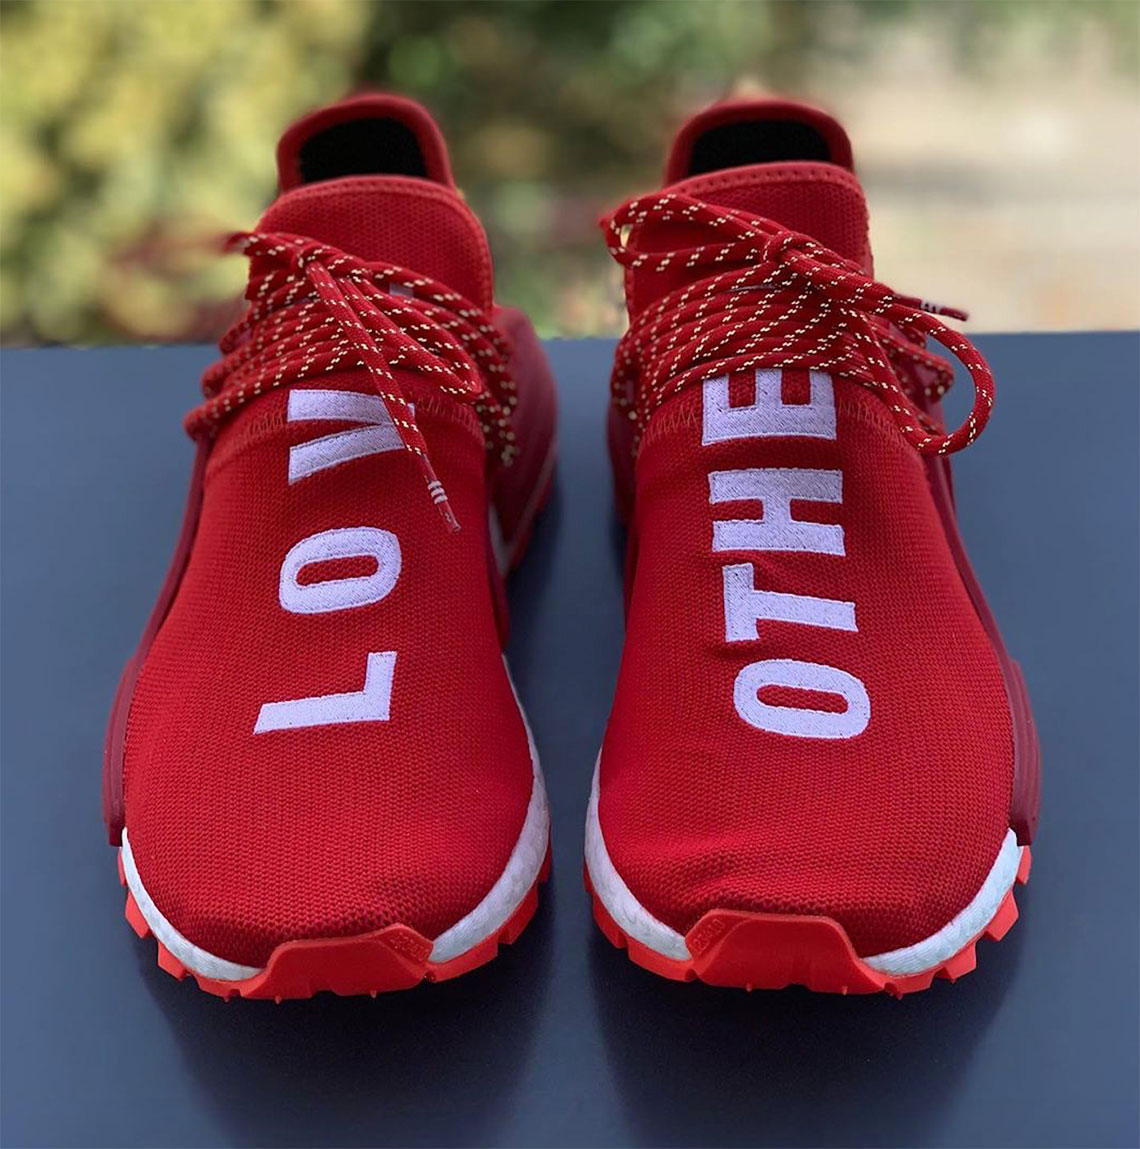 Adidas Pharrell Hu Reviewed for Performance in 2020